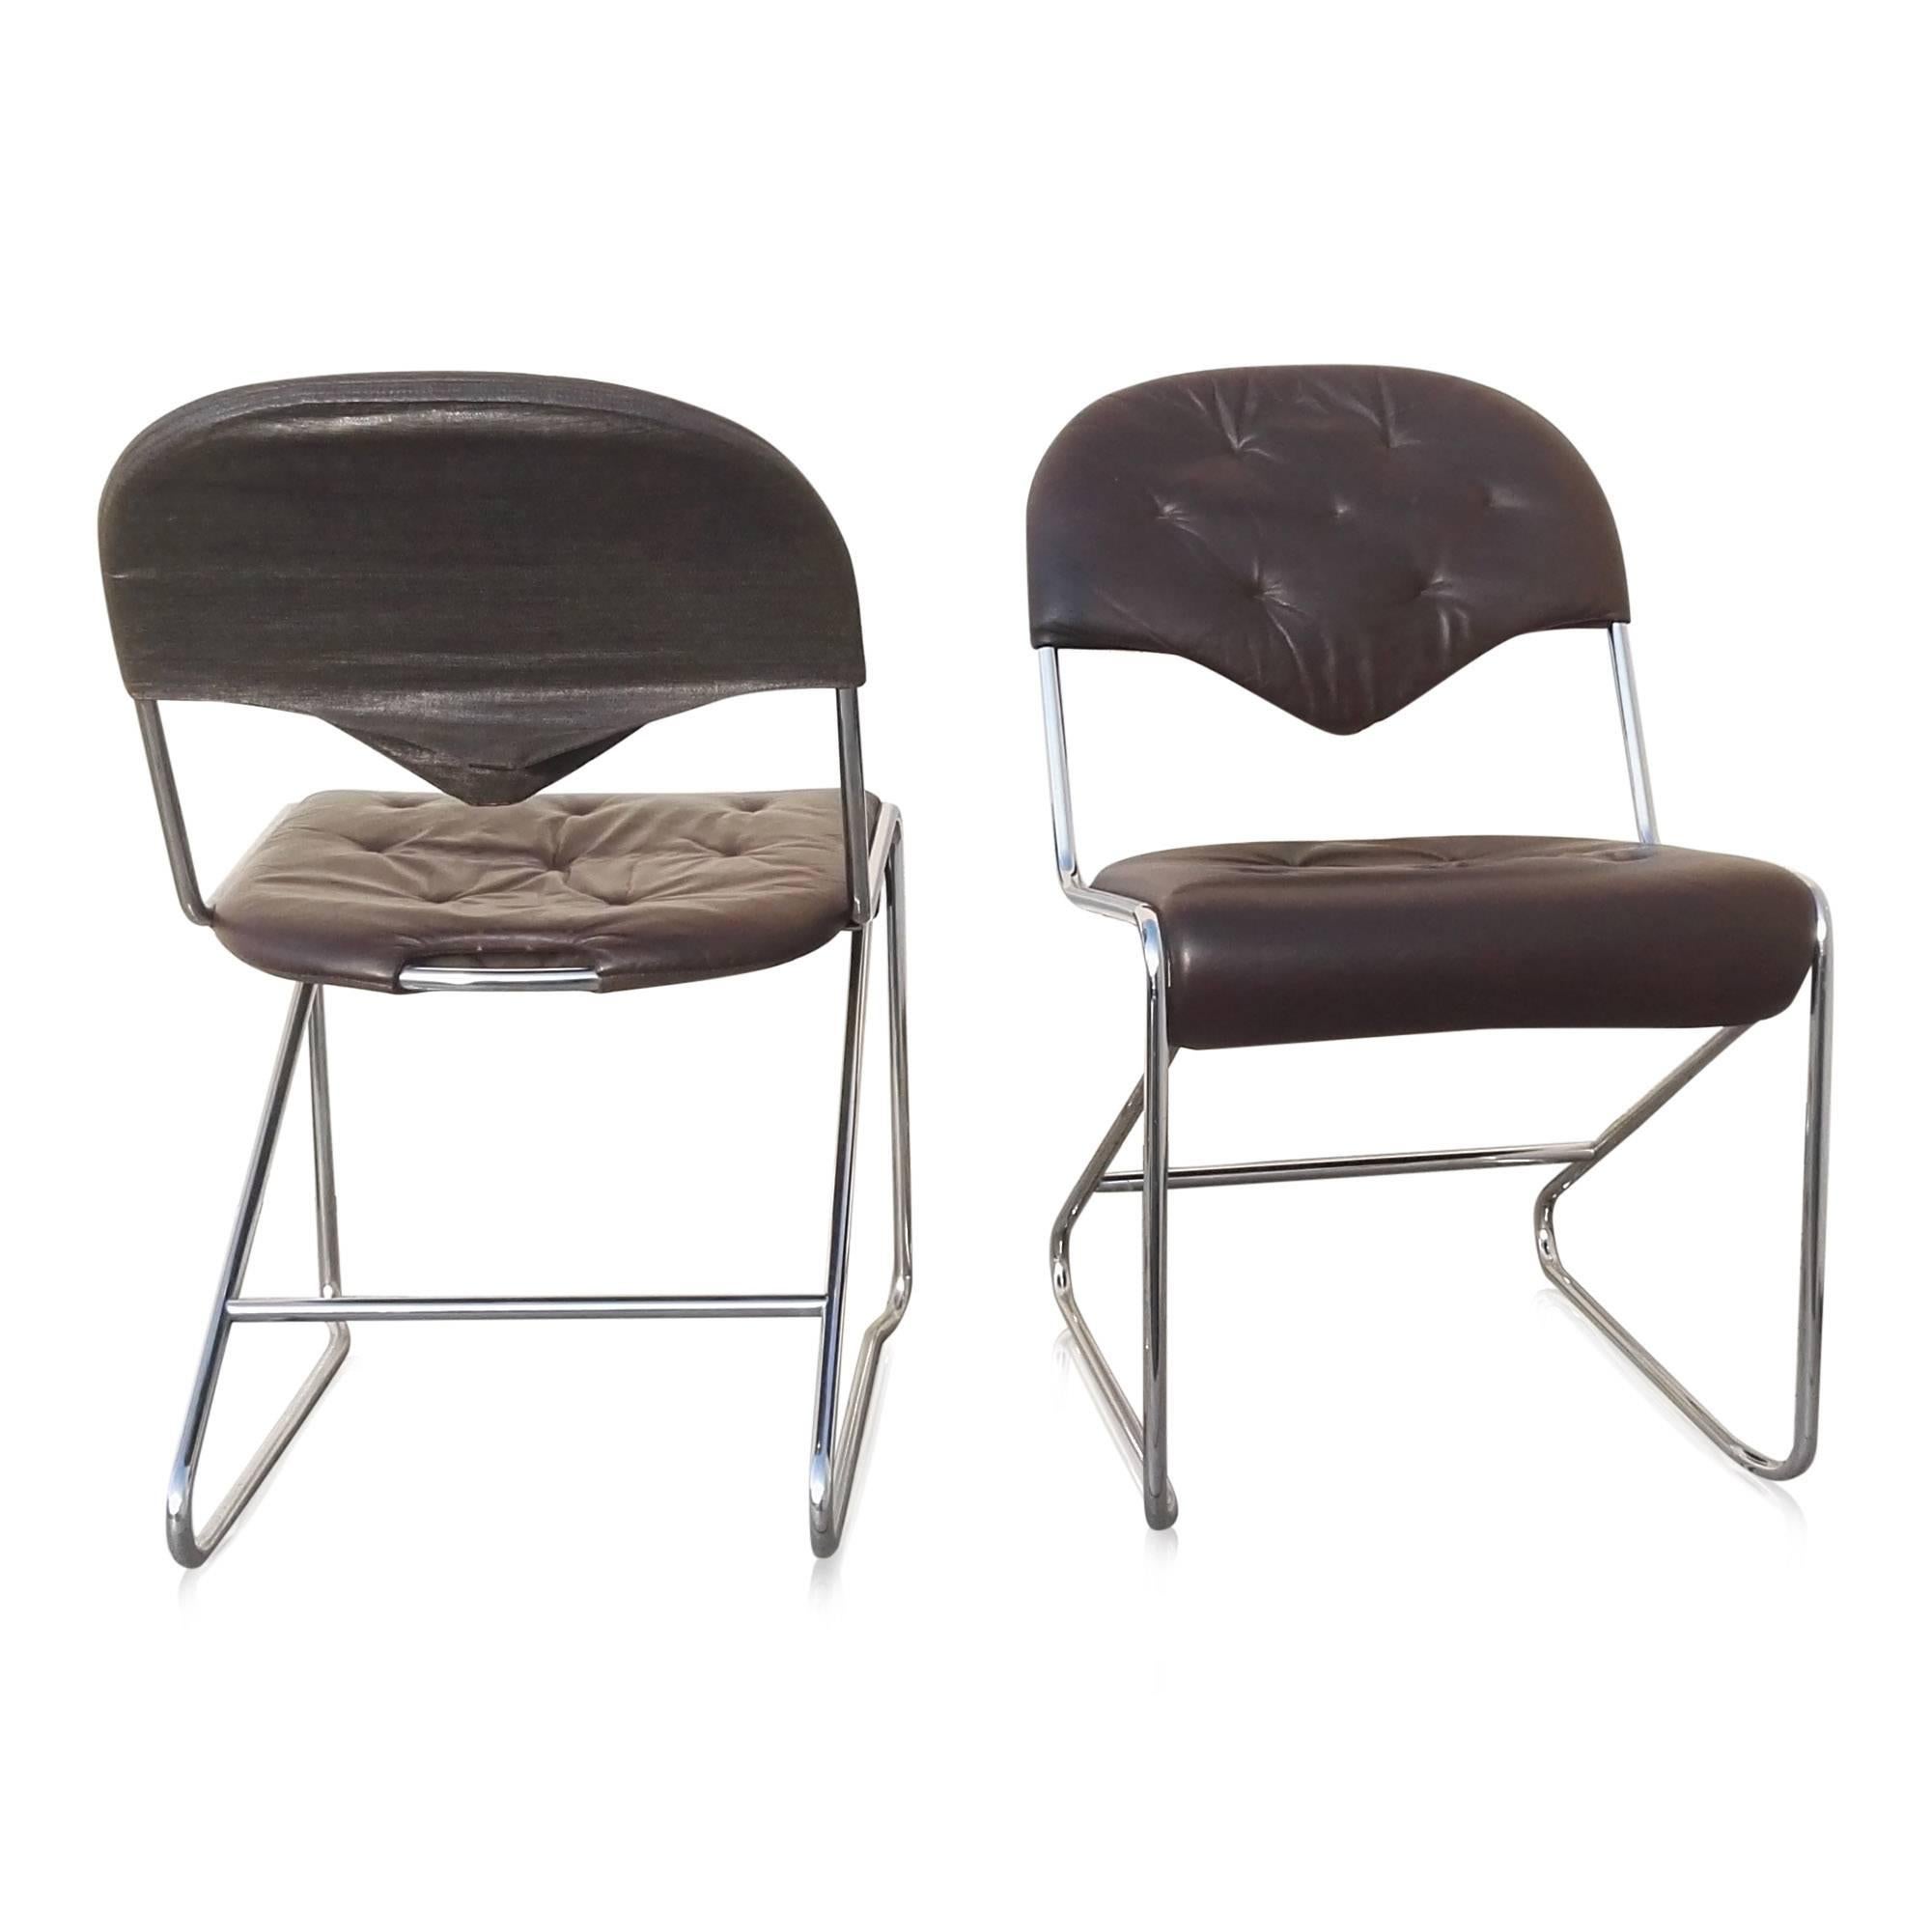 Late 20th Century Pair of Chrome and Leather Chairs in the Style of Faleschini, Italy, 1970s